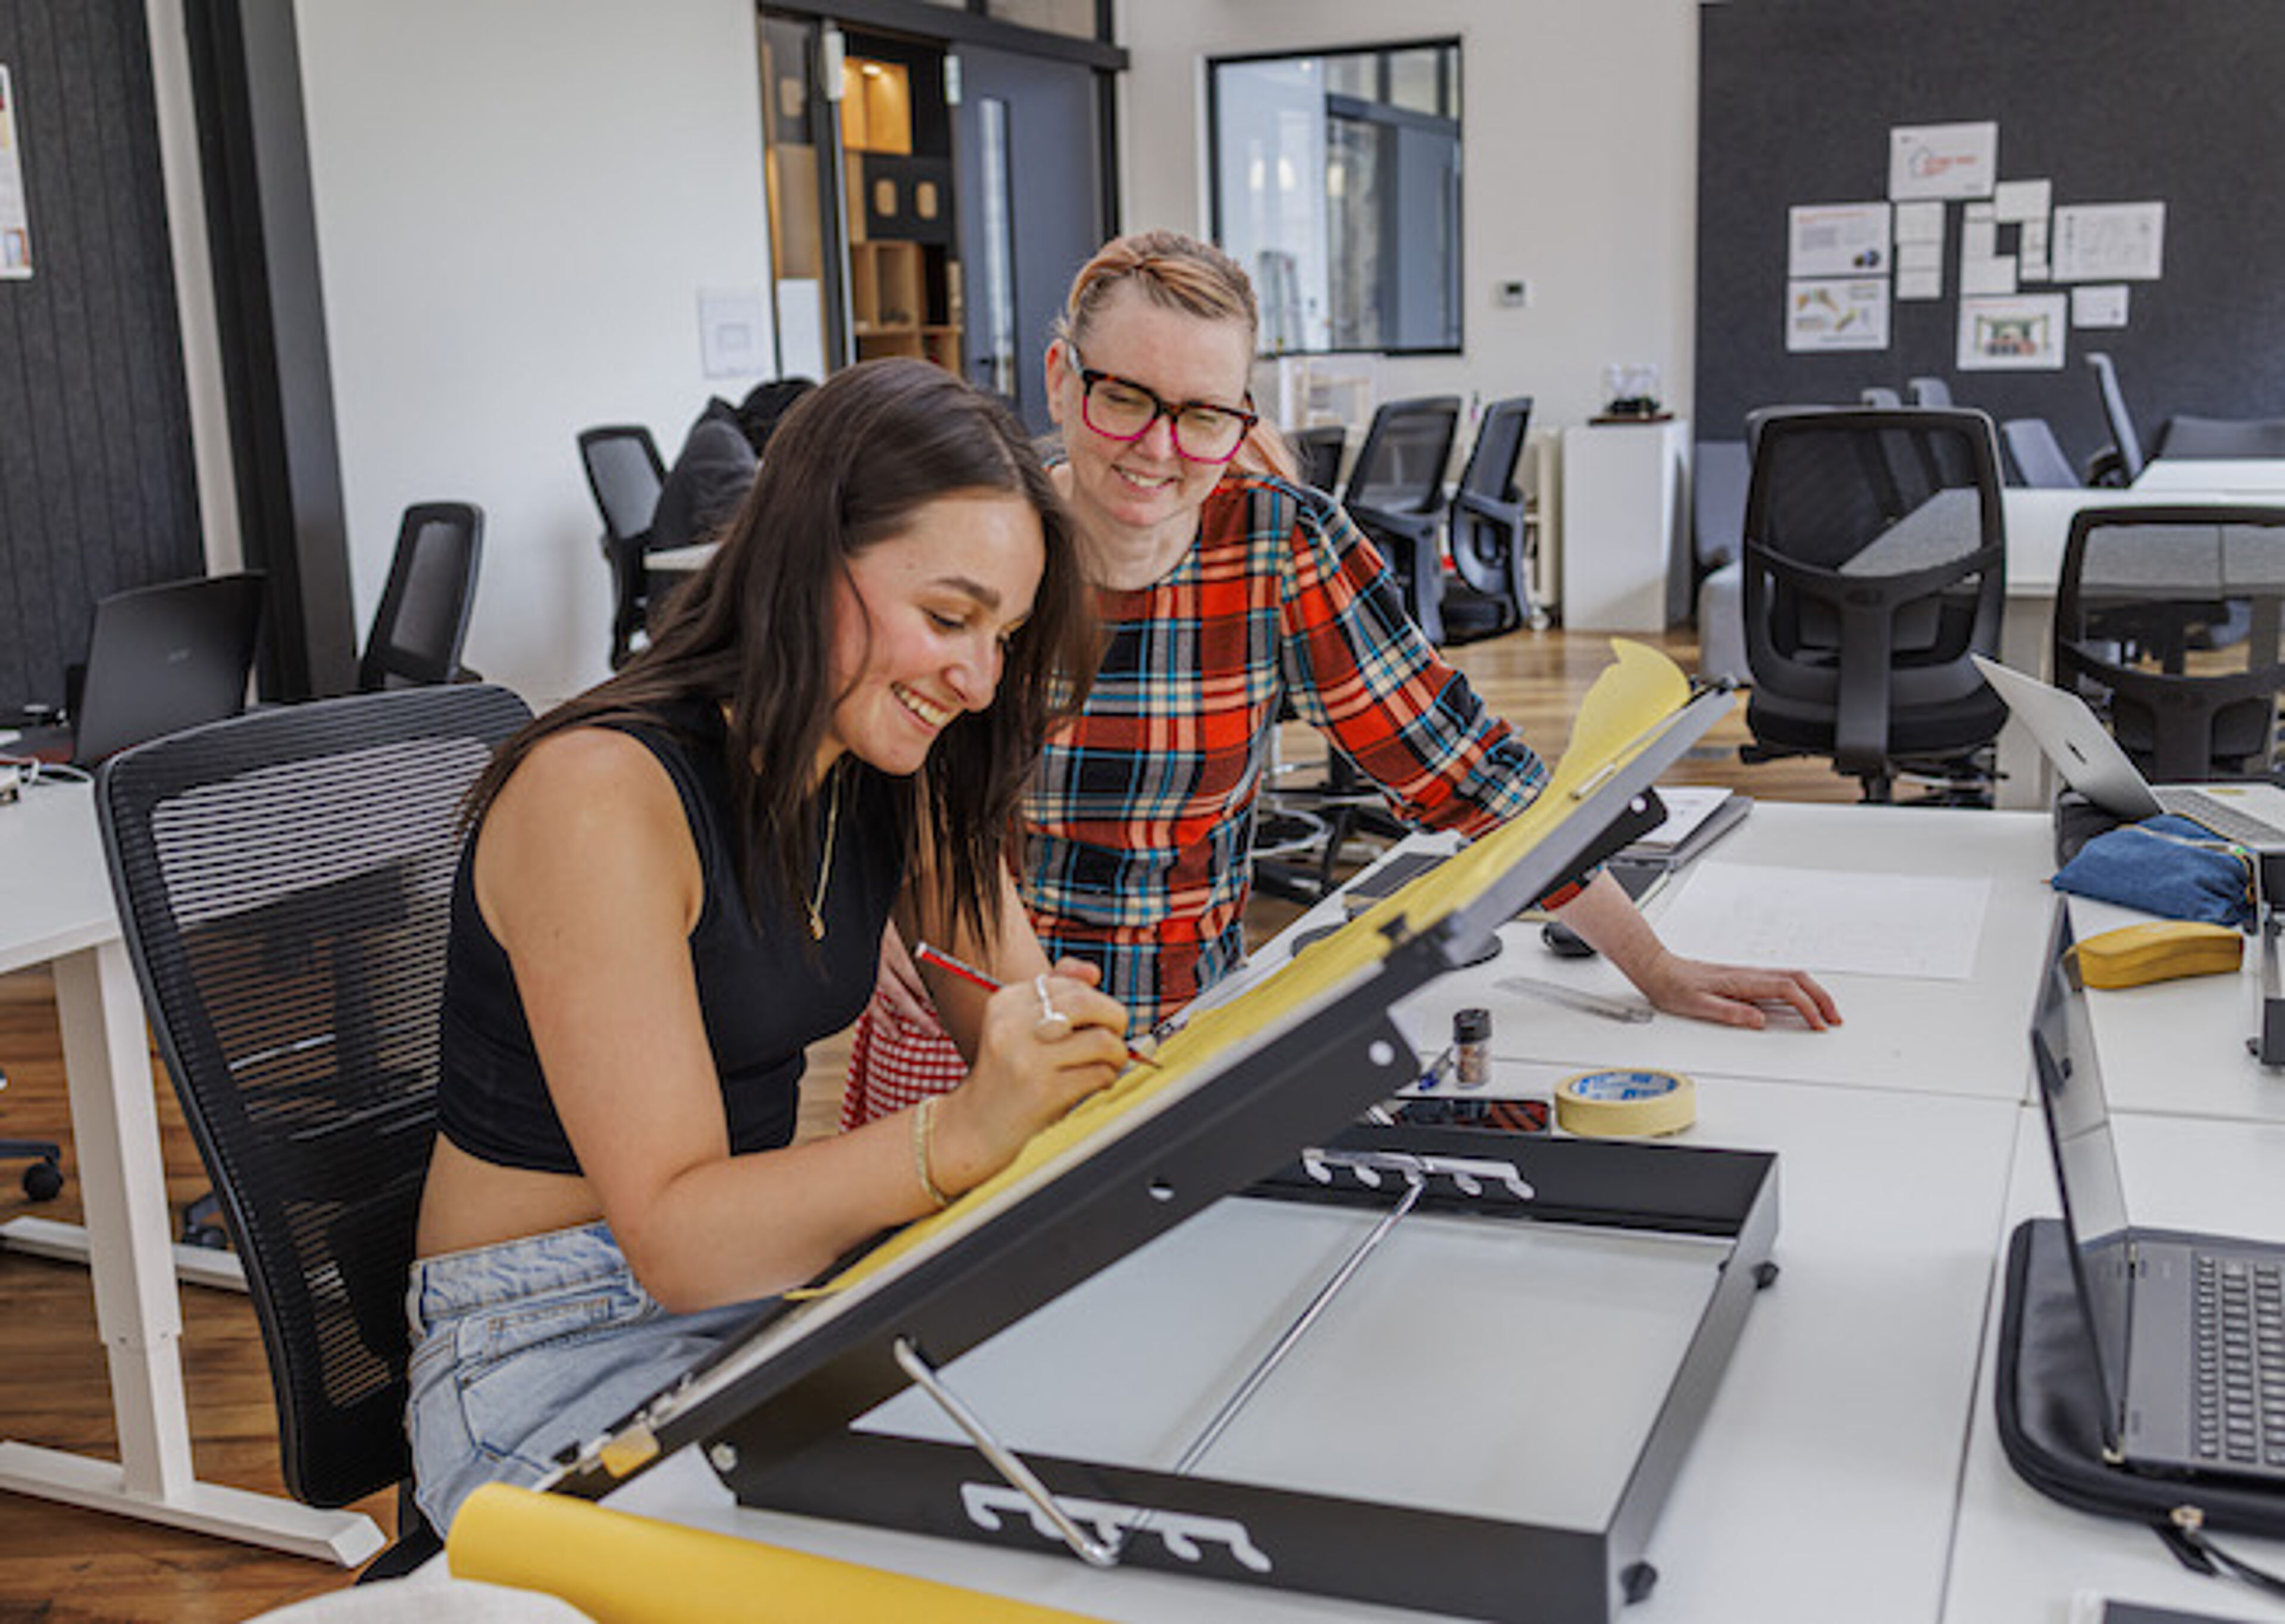 Two designers share a moment of joy while working on a project in a bright, modern office.